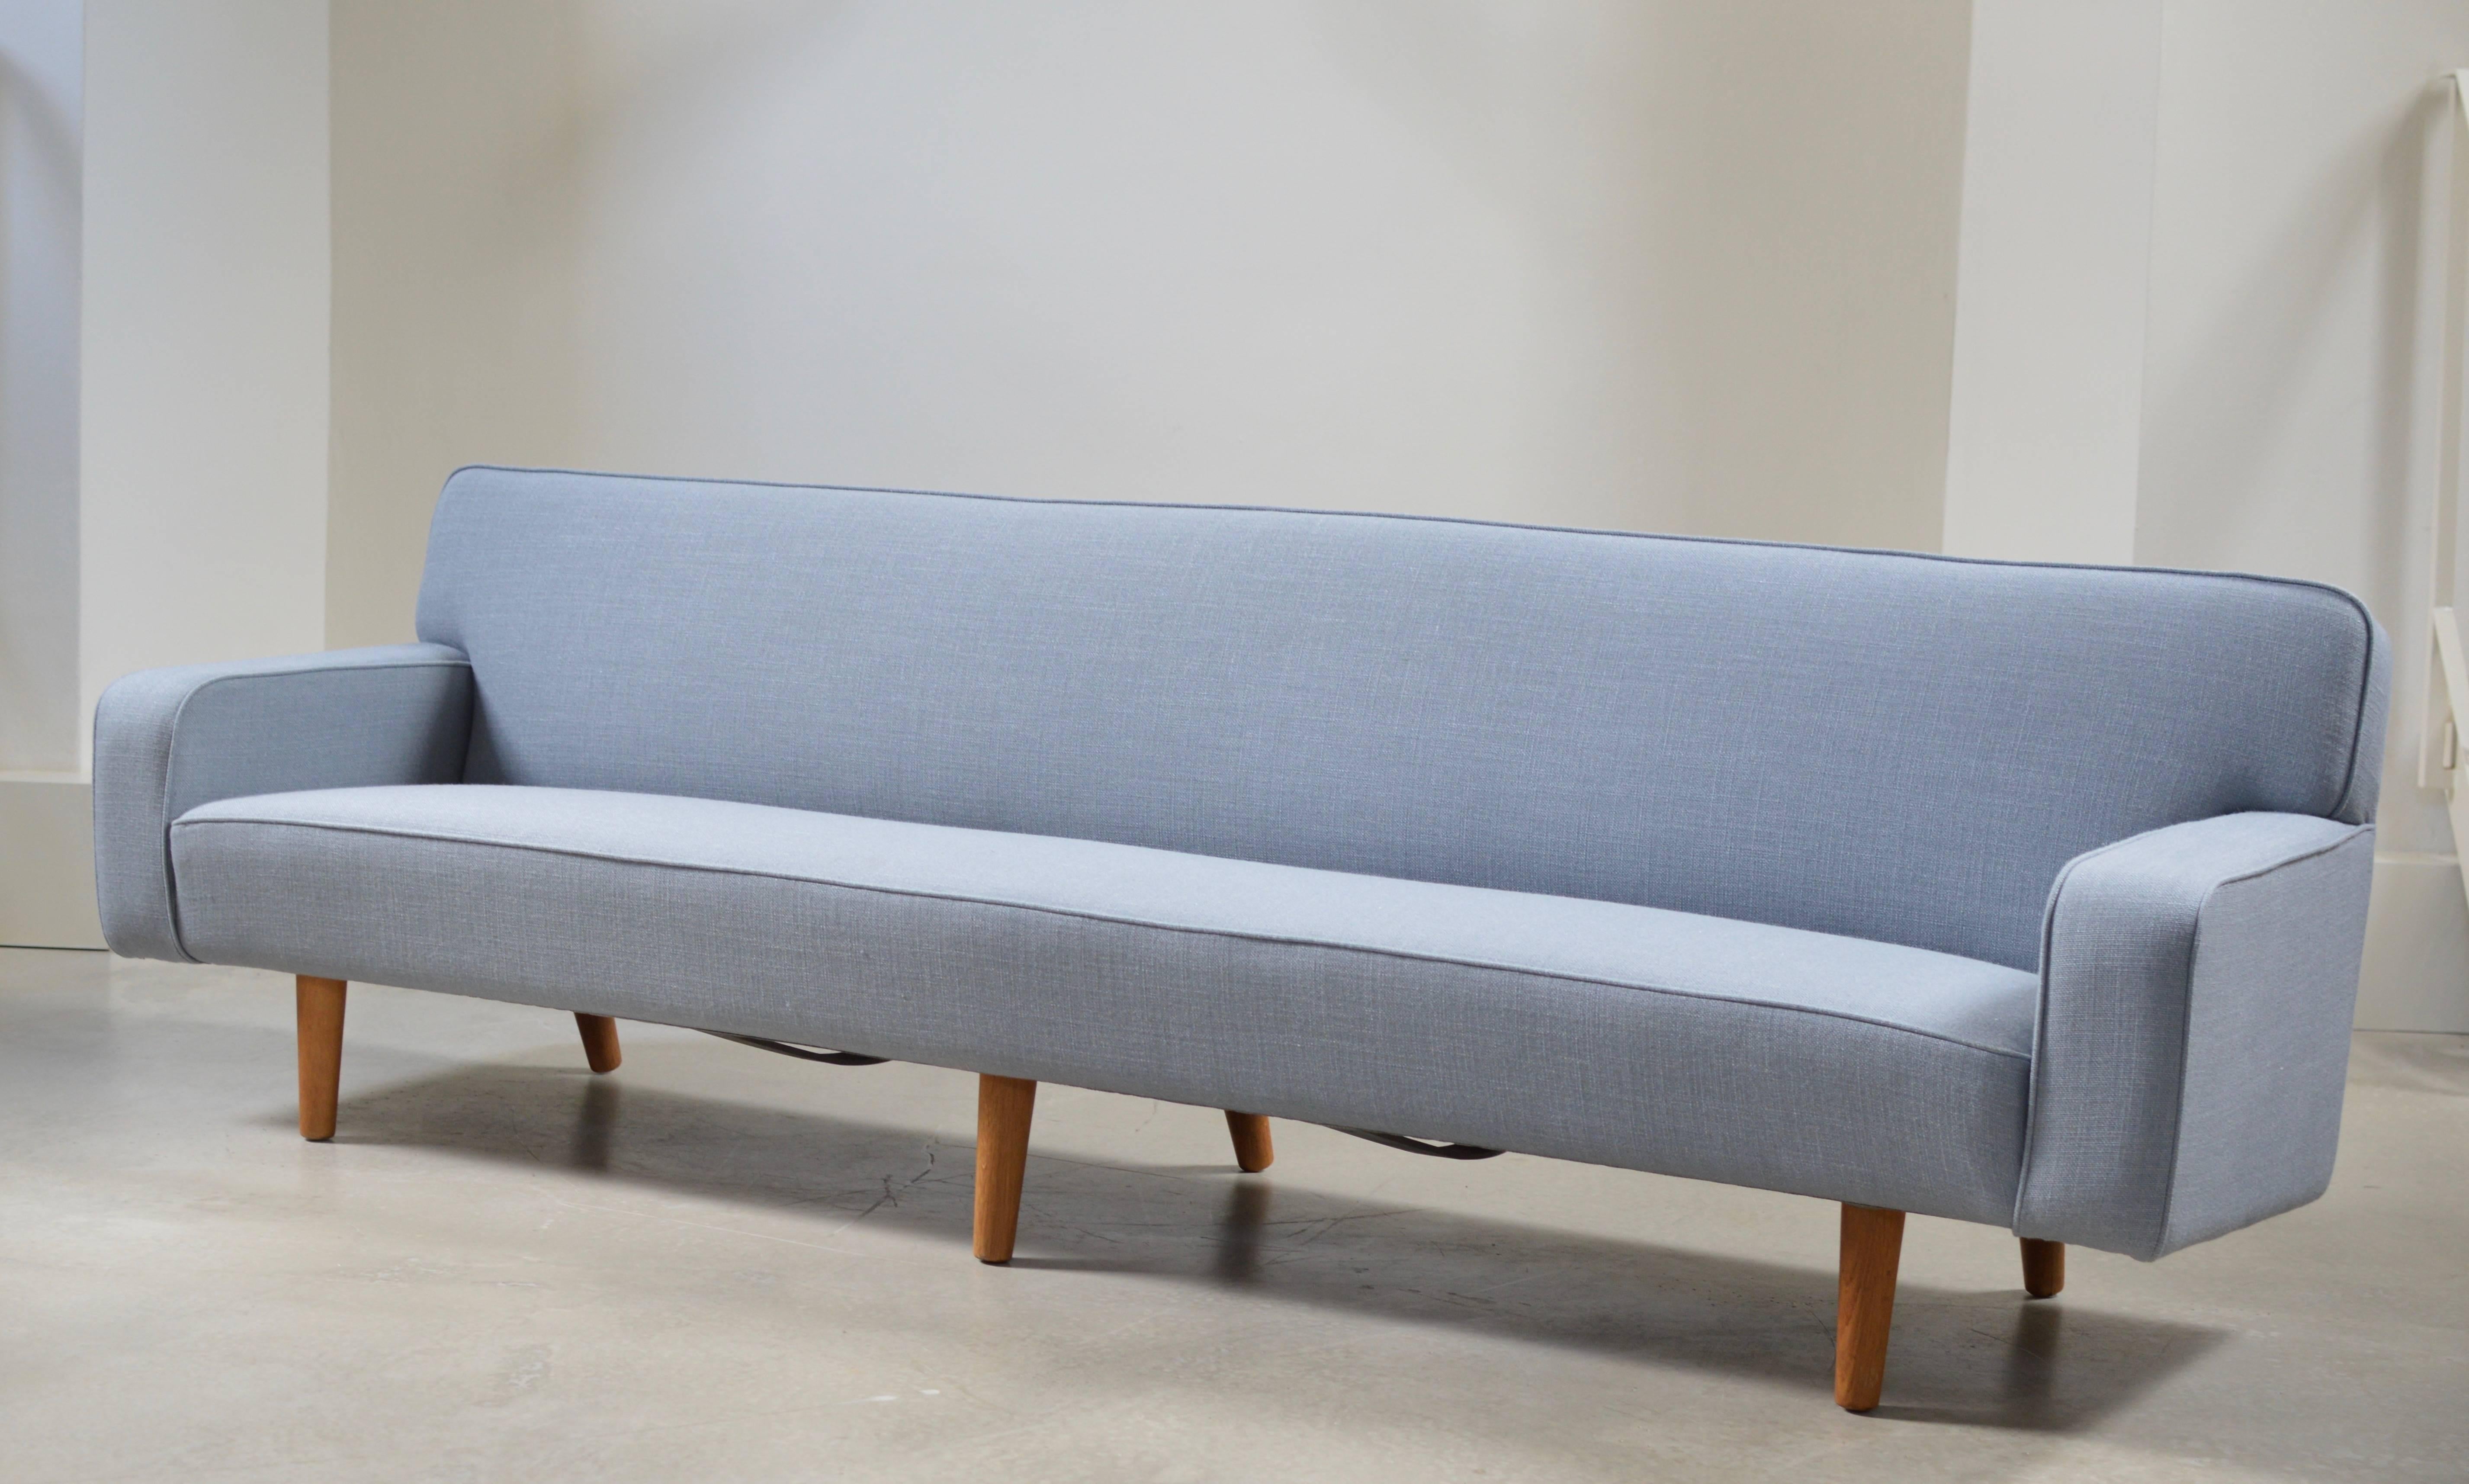 Large streamlined design sofa model AP 33 from 1956 by Hans Wegner for A.P. Stolen Denmark. A.P Stolen is known for manufacturing most comfortable and highly crafted 'Pappa Bear / Teddy Chair' by Hans Wegner, this sofa is in comfort and quality thus